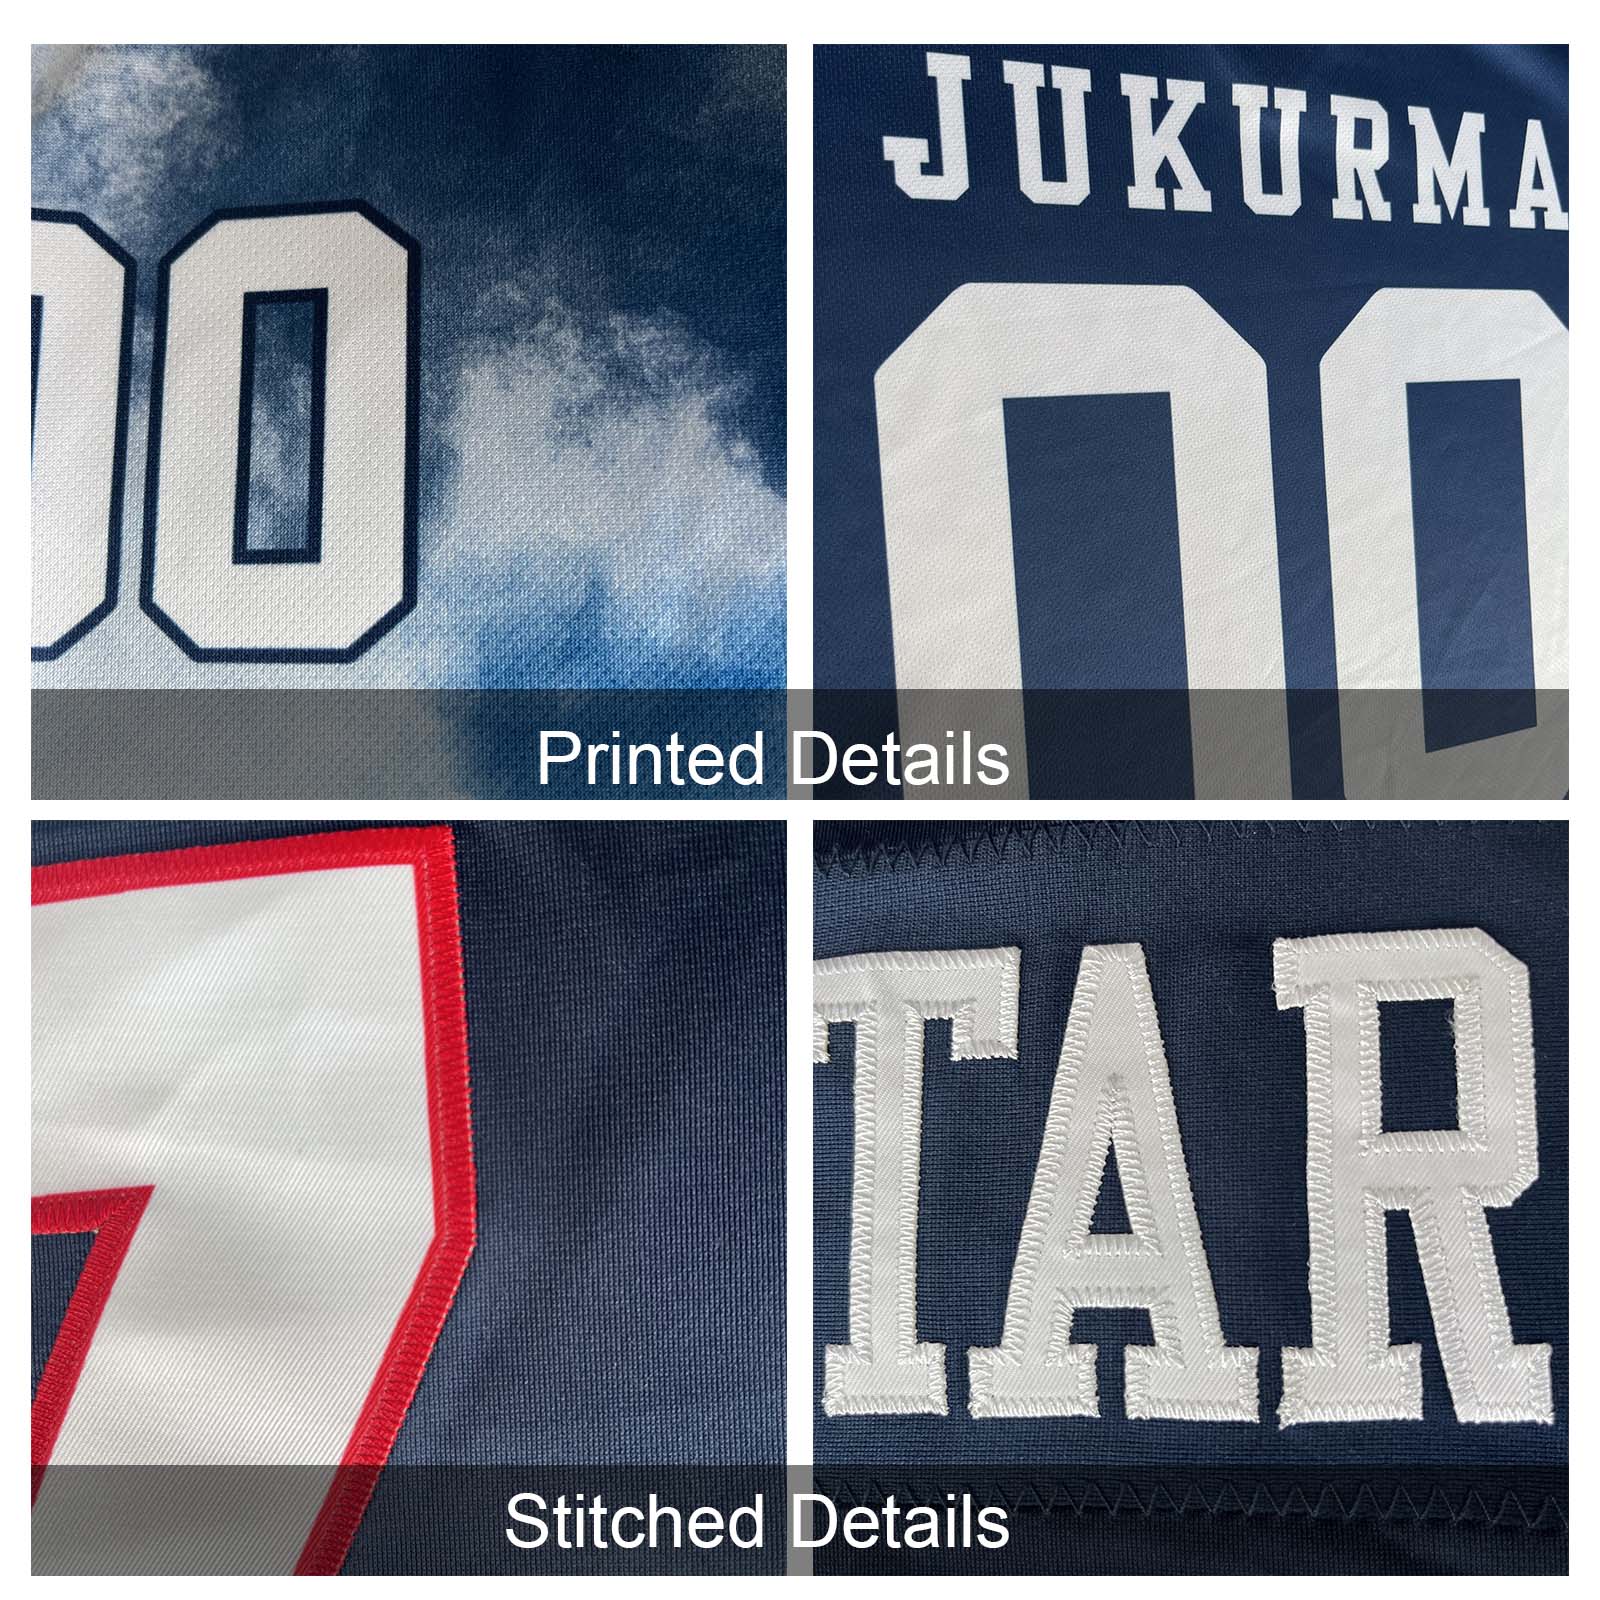 Custom Football Jersey Shirt Personalized Stitched Printed Team Name Number Navy & White